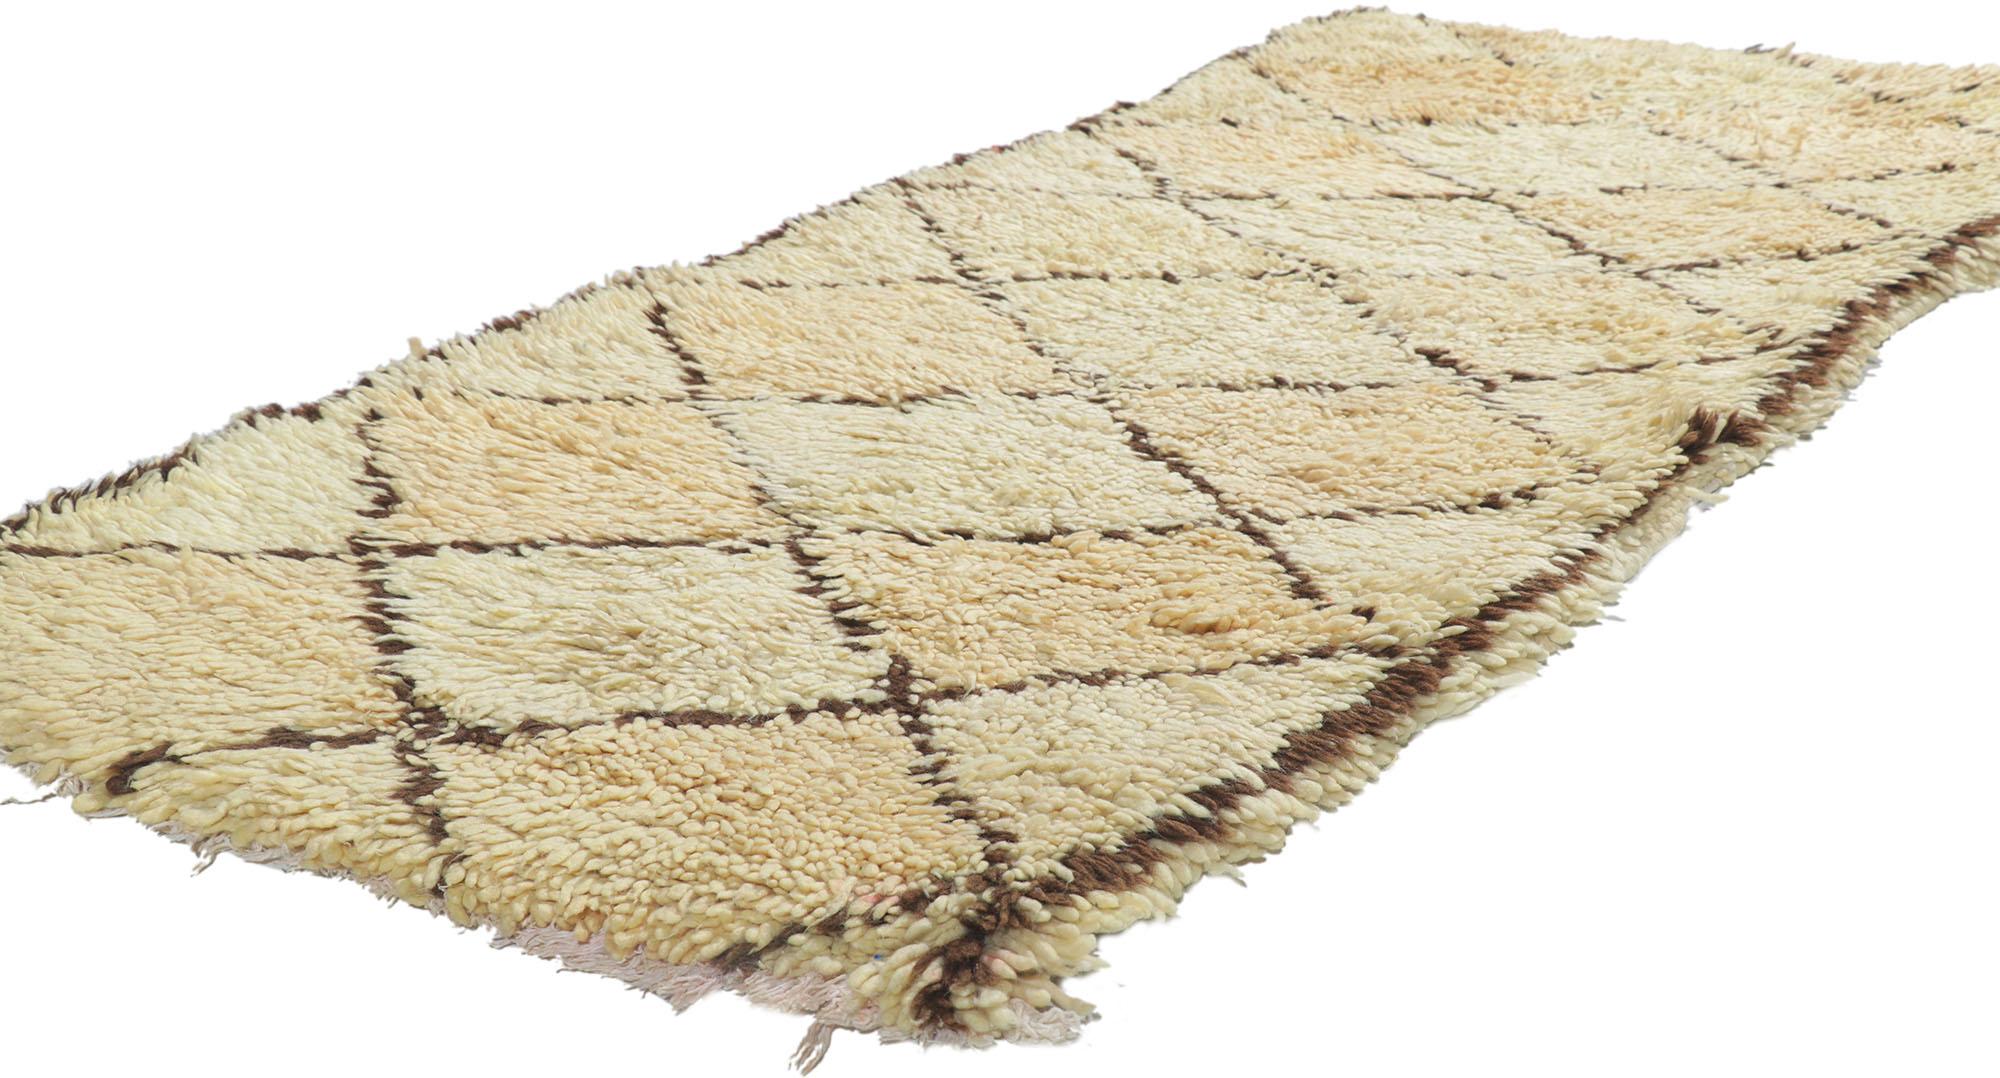 21639 vintage Berber Moroccan rug with Modern Bohemian style 02'06 x 06'02. With its simplicity, incredible detail and texture, this hand knotted wool vintage Berber Moroccan rug is a captivating vision of woven beauty. Though deceptively simple,